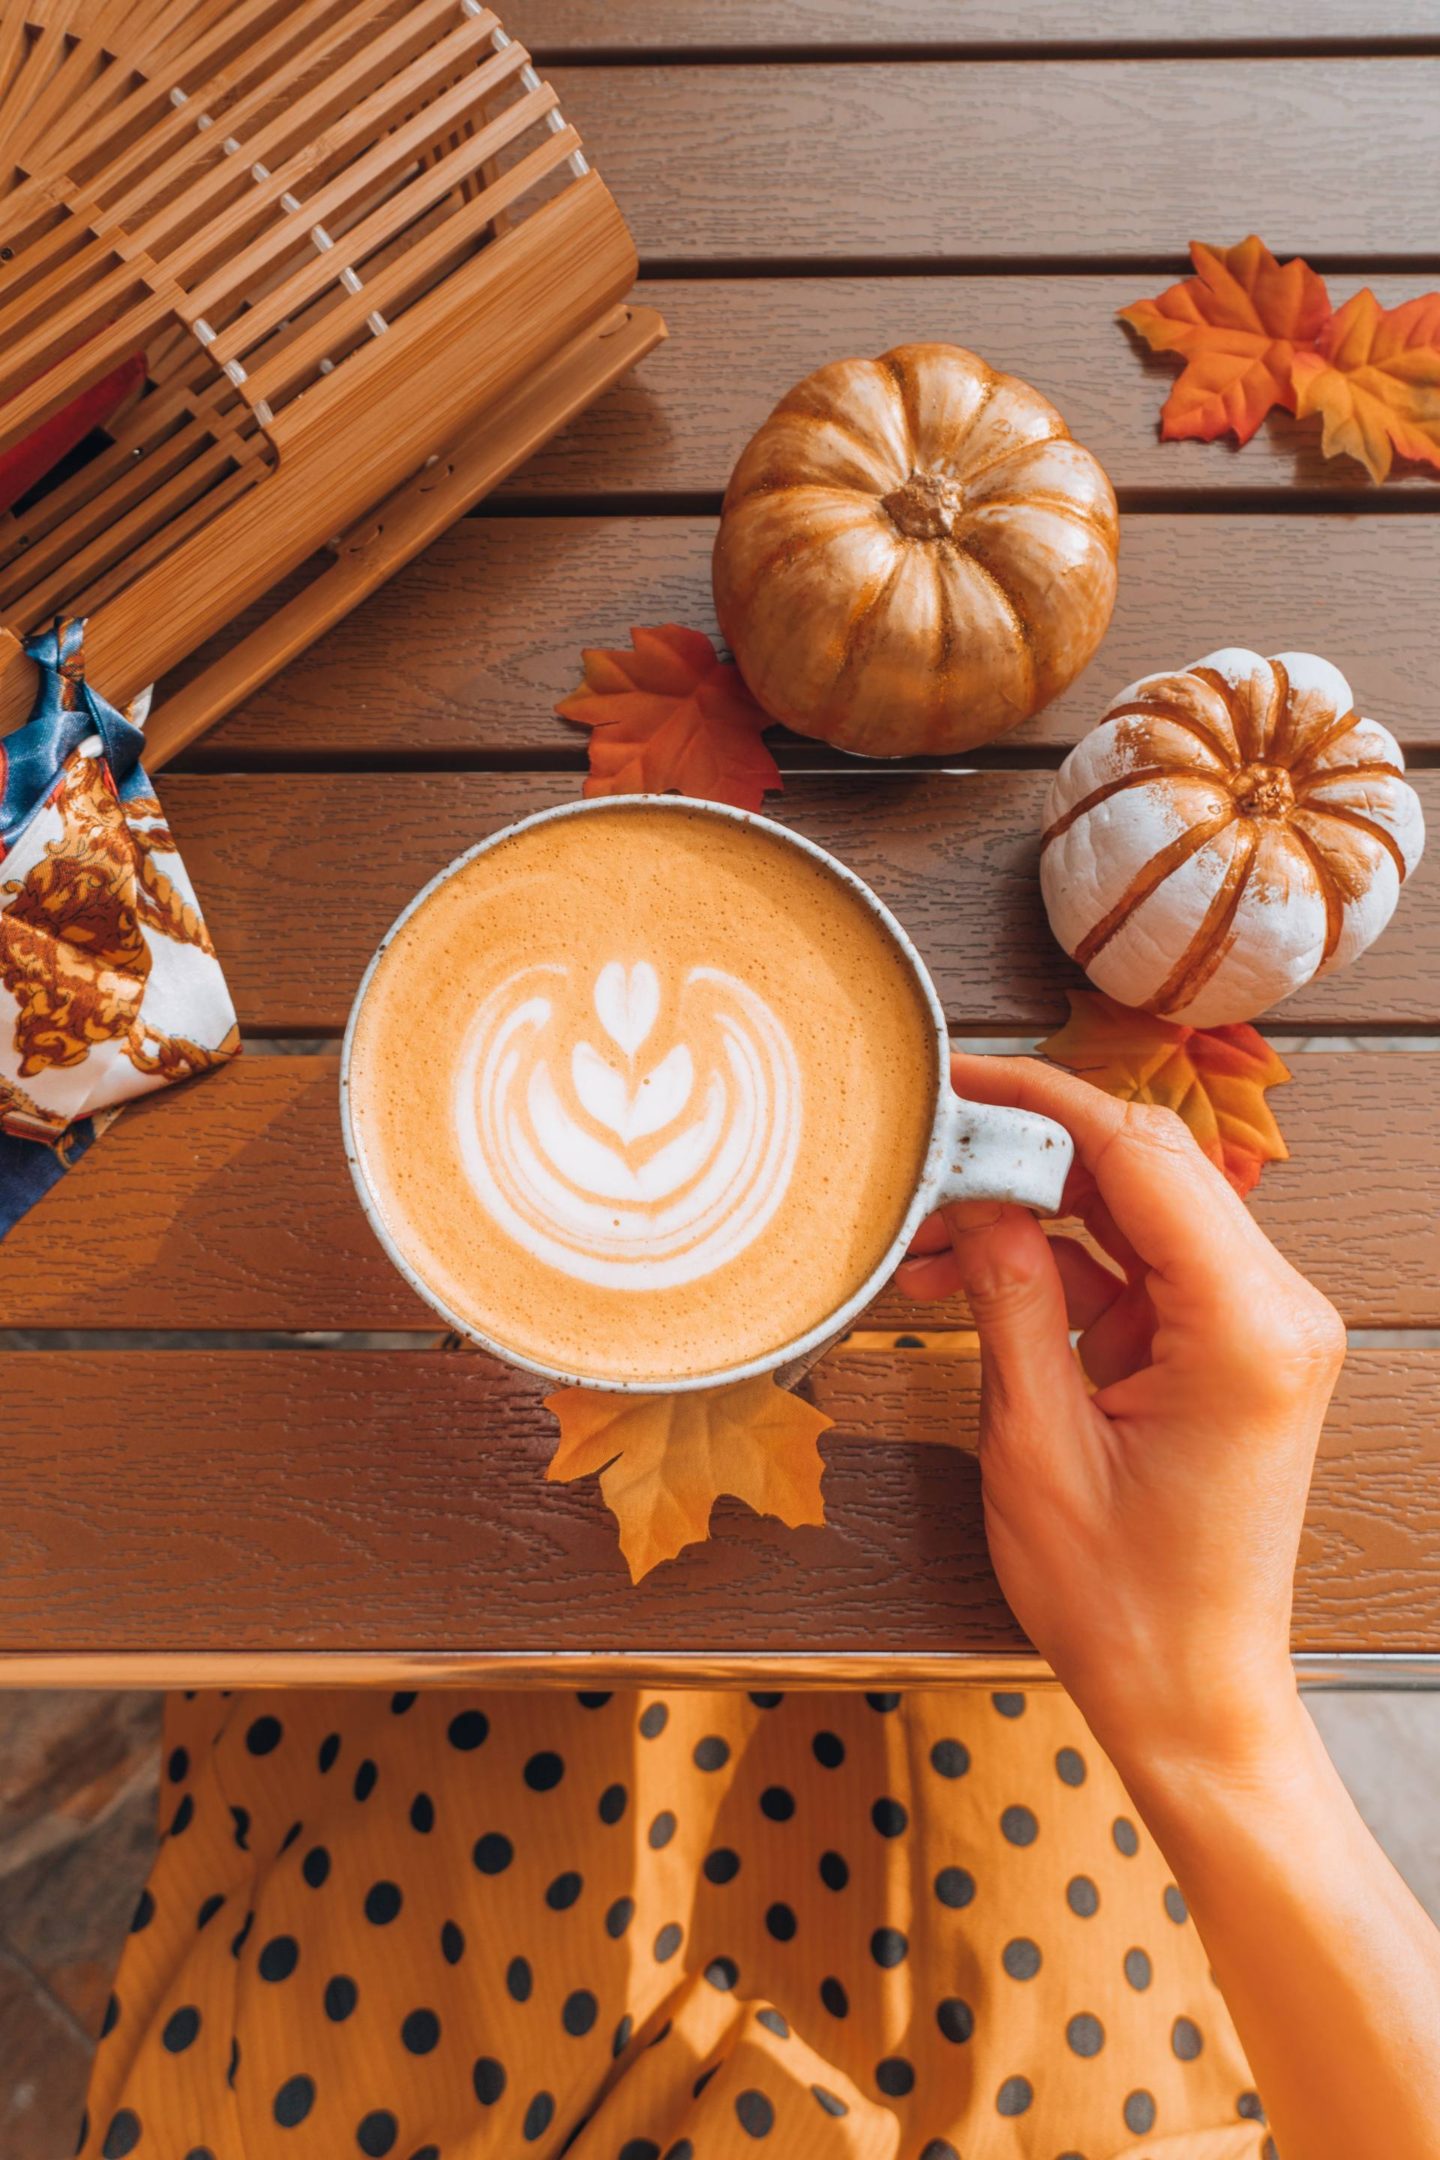 Starbucks and Stay In - Recreate your 5 favourite Fall Hot Drinks at Home